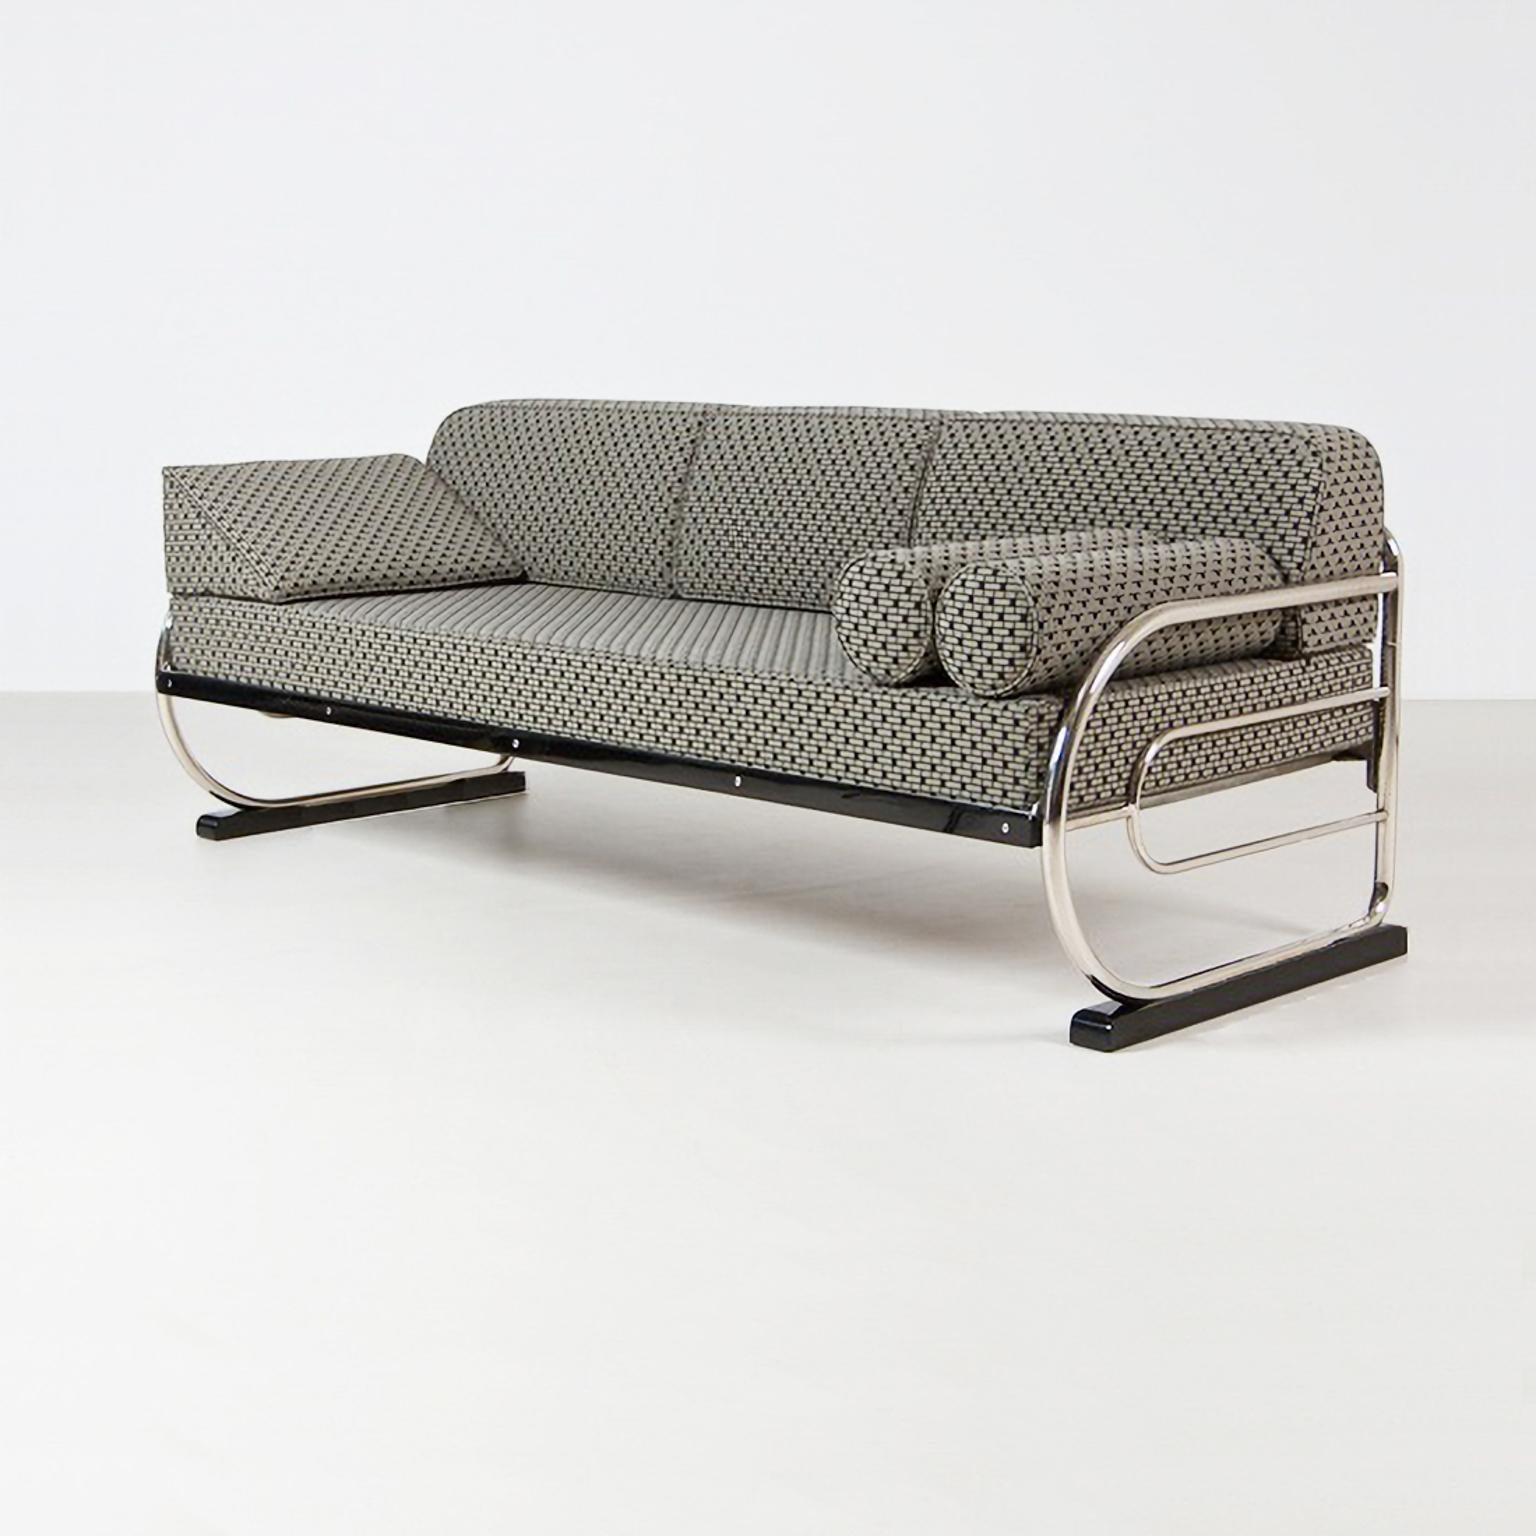 This original tubular steel Couch / Daybed in Art Deco - Streamline Design is restored on request and available in different amounts. 

Delivery time between 8-10 weeks.